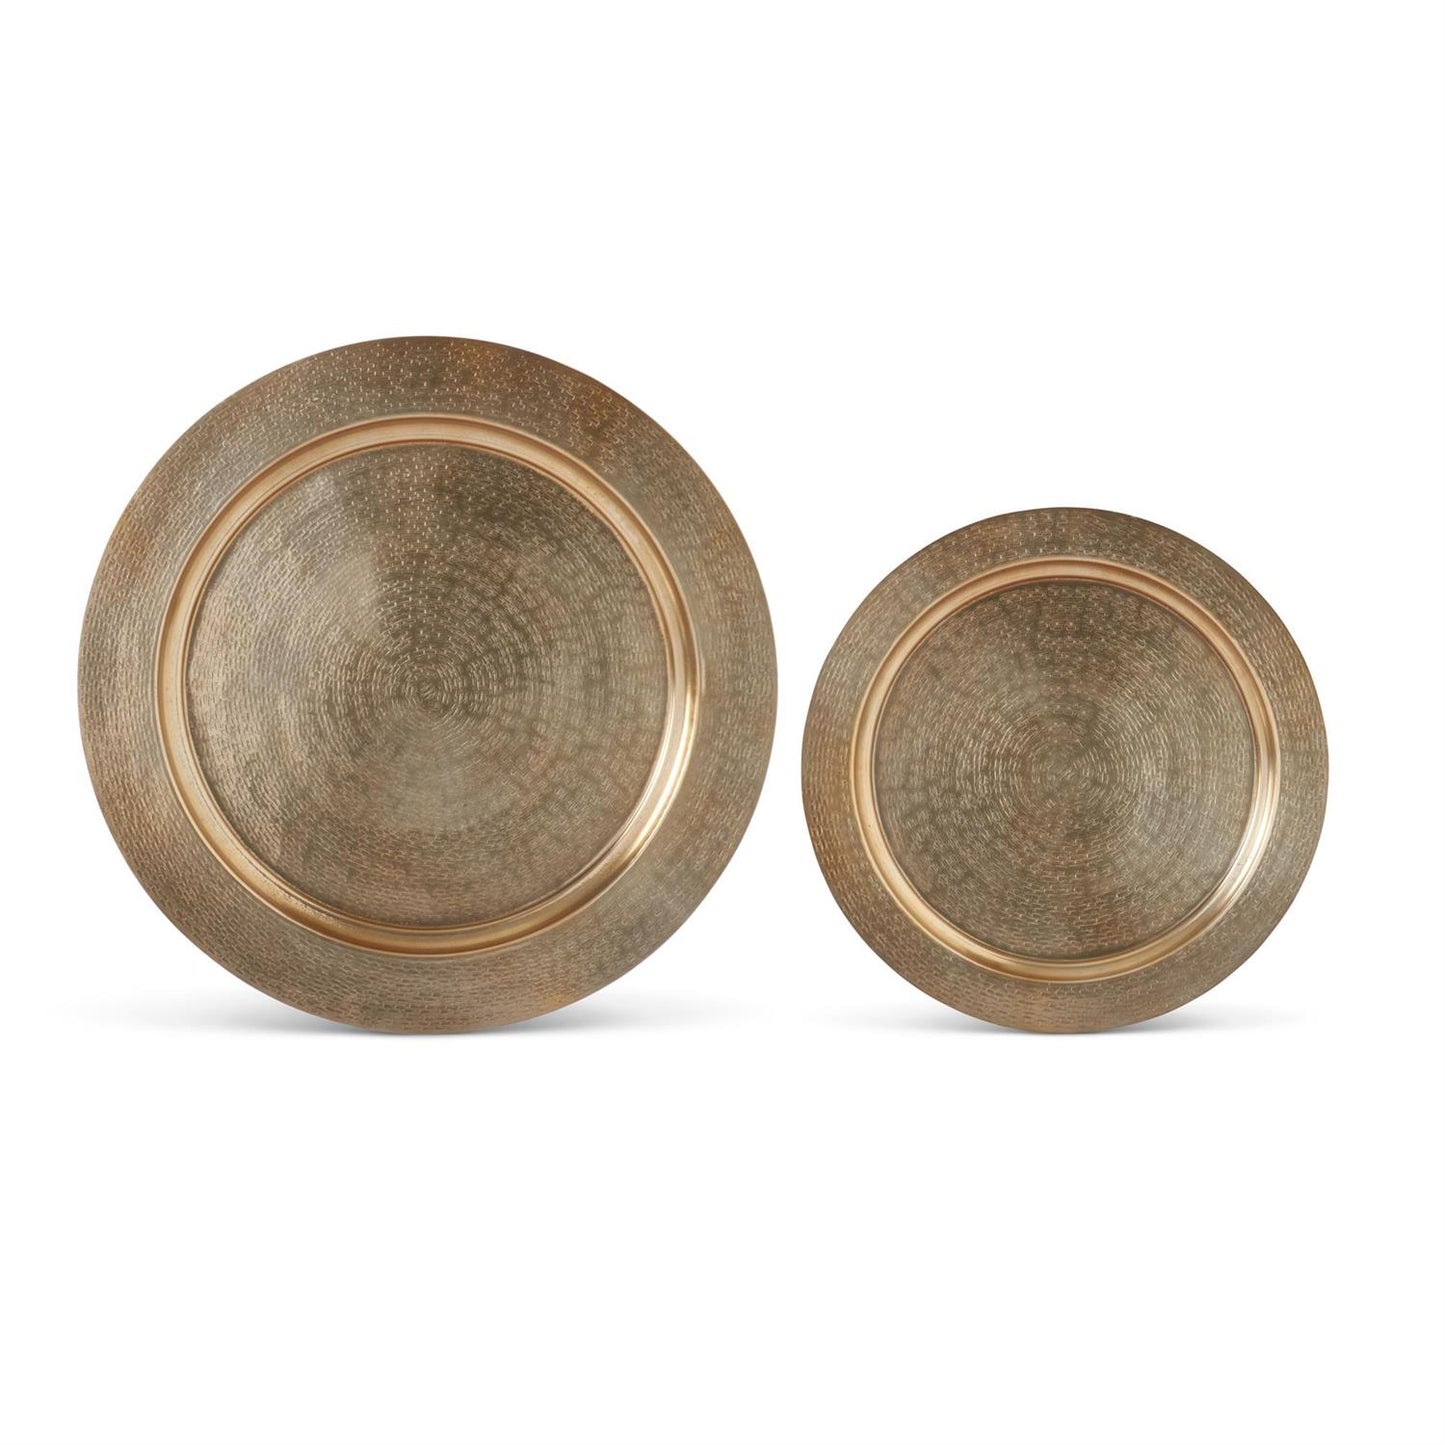 TEXTURED ANTIQUE GOLD RIMMED TRAY